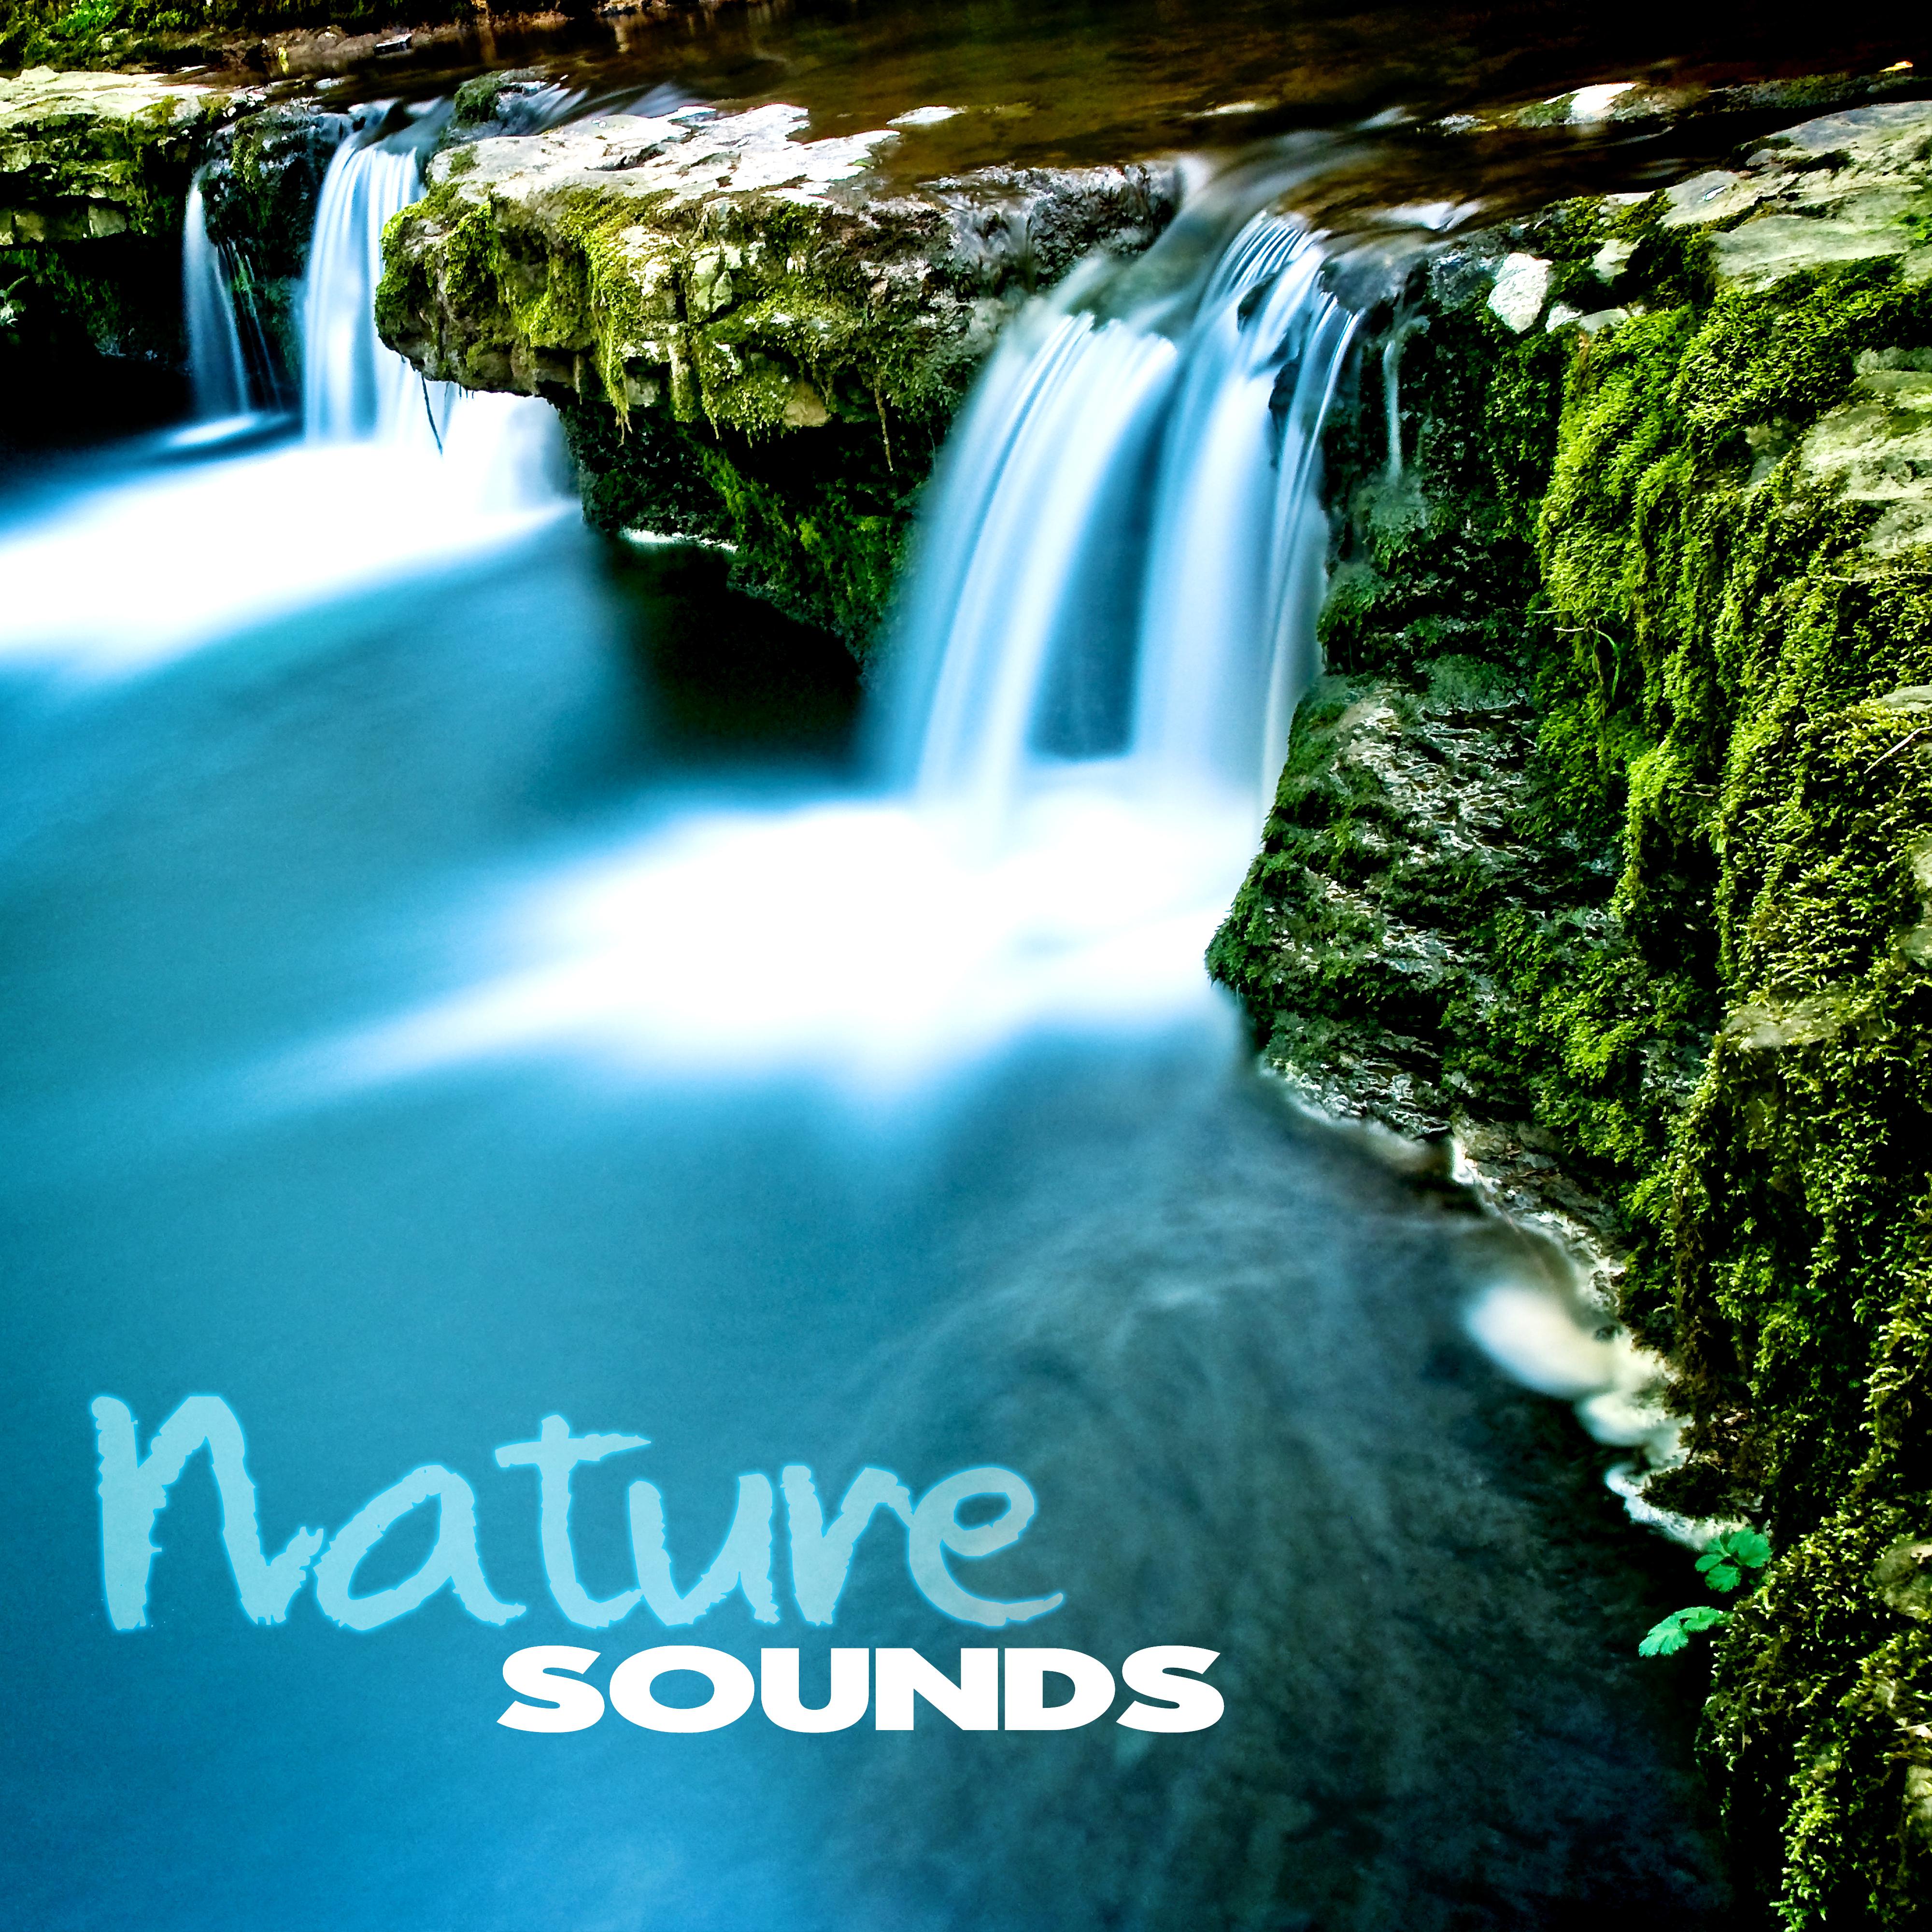 Nature Sounds – Water Sounds for Relaxation, Singing Birds for Spa, Ocean Sounds for Yoga & Meditation, Rain Sounds for Reiki, Wellness, Massage, Asian Zen